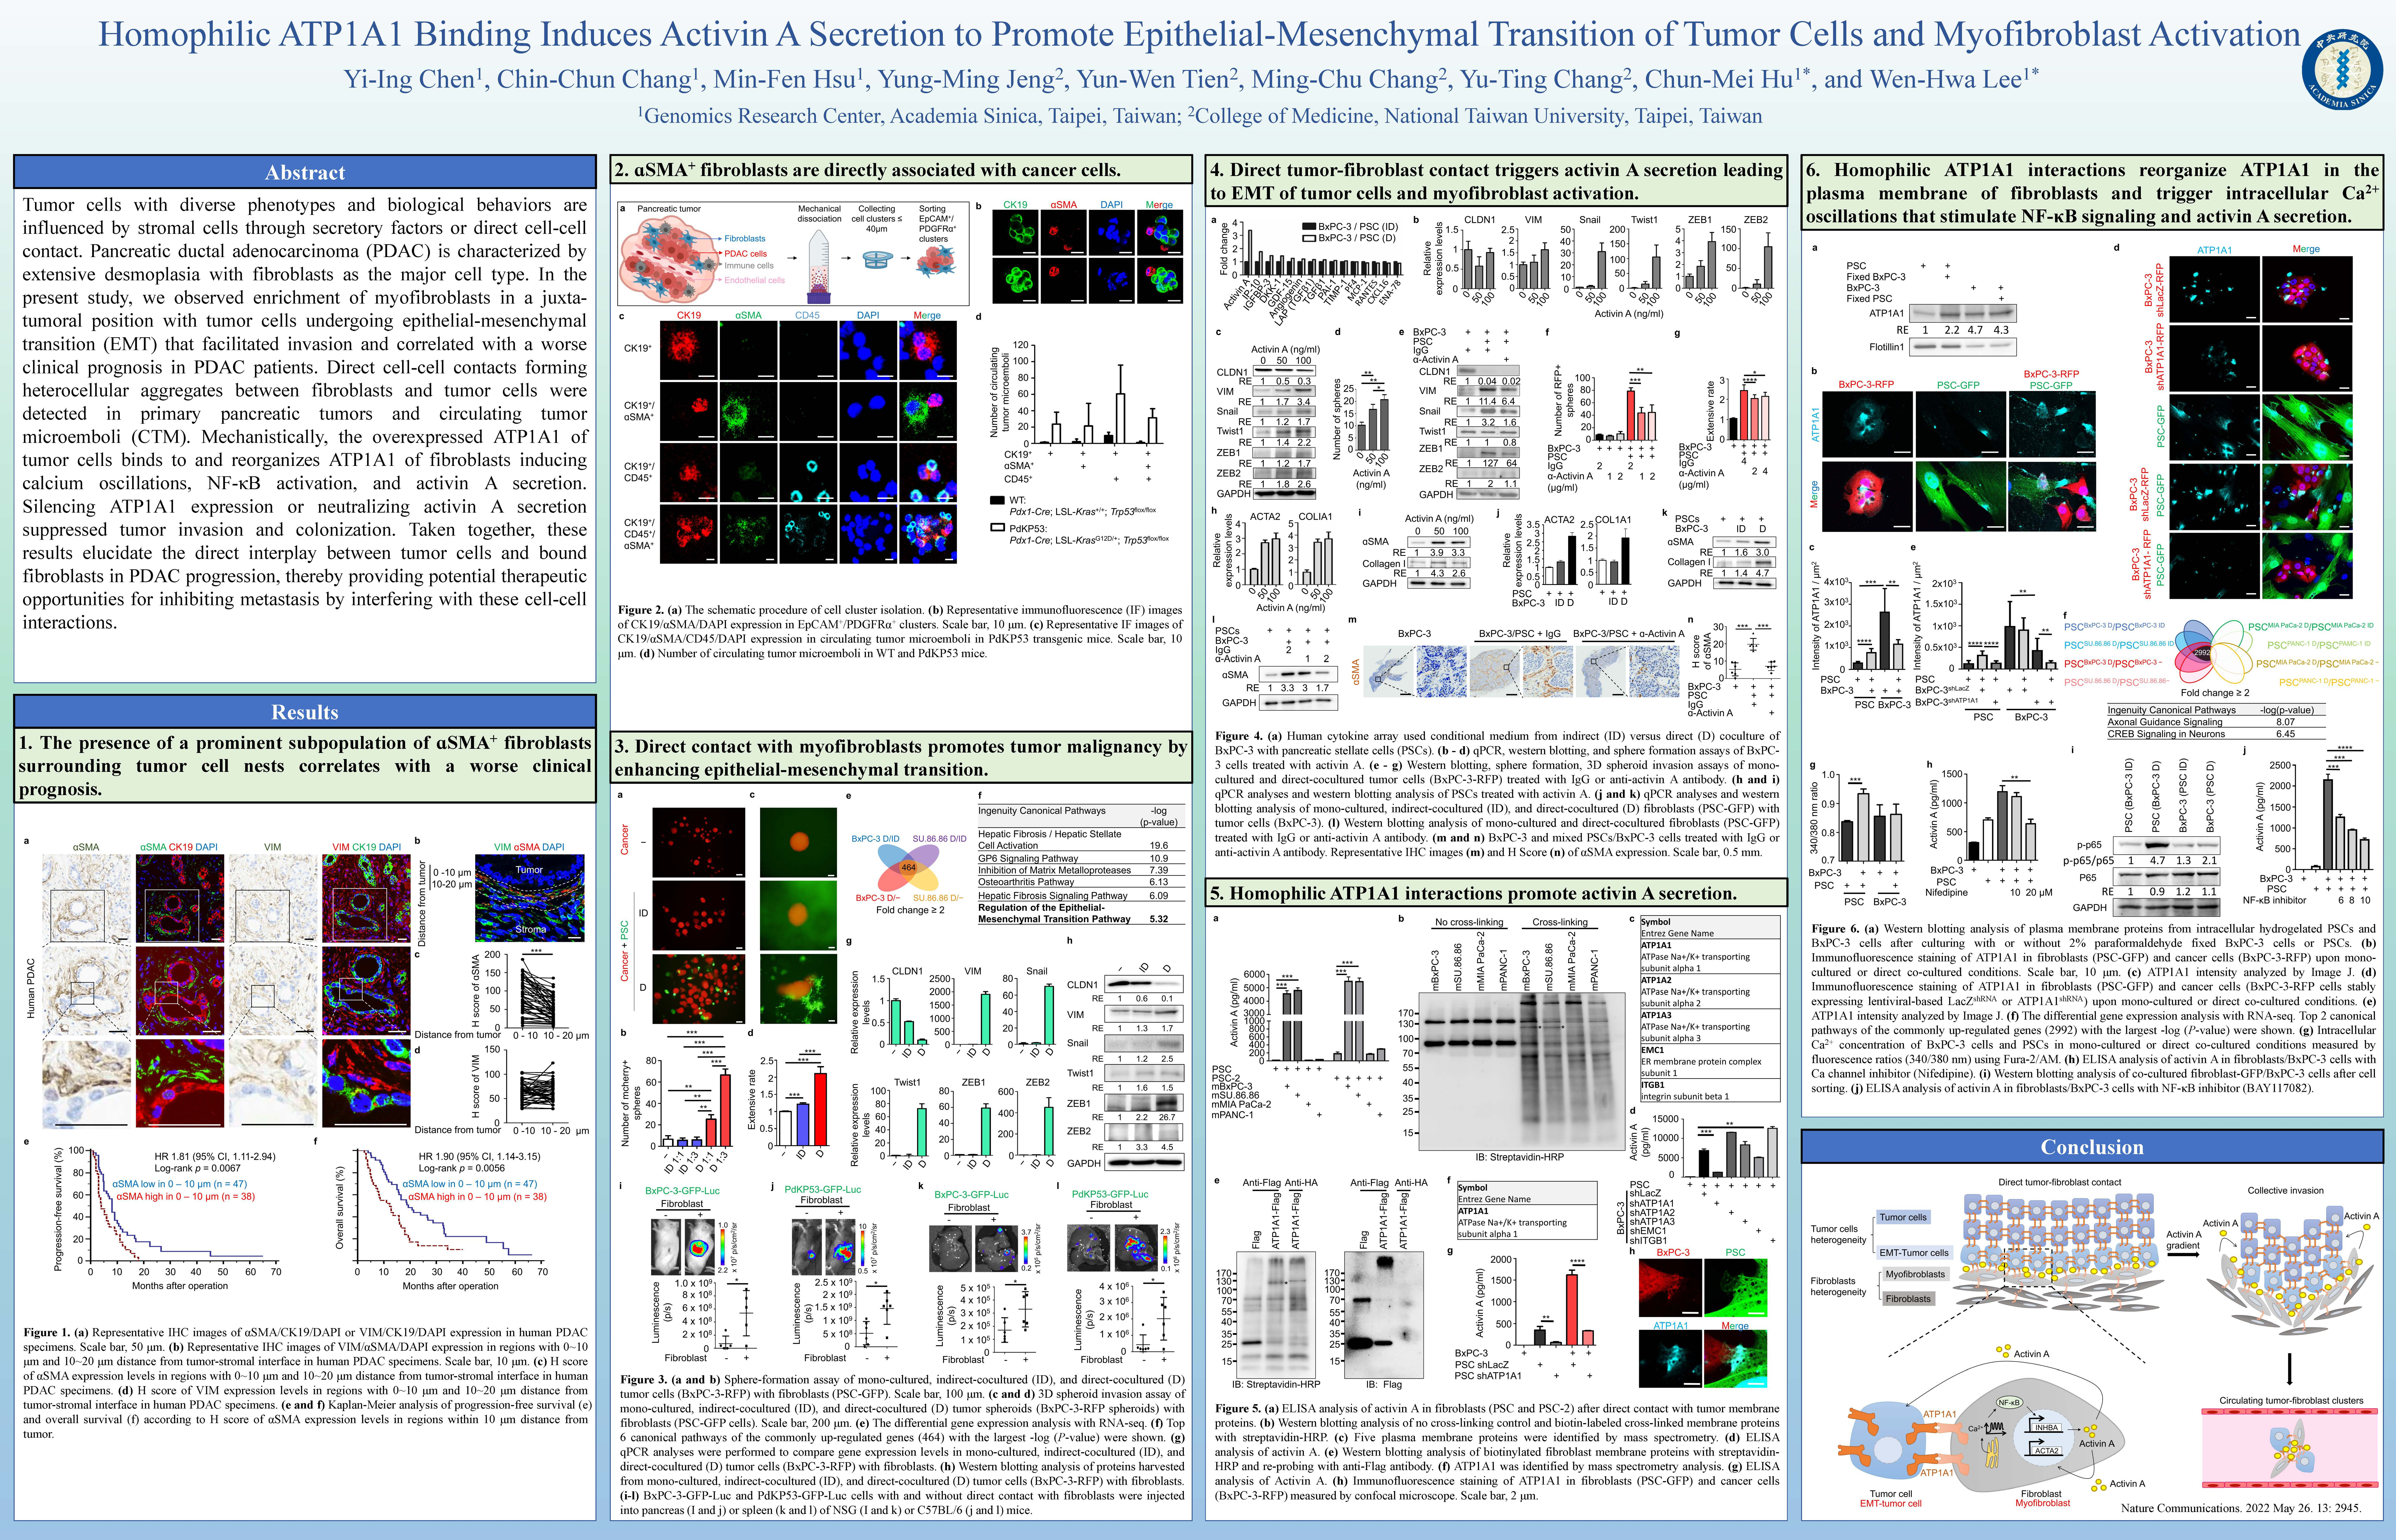 Significant Research Achievements of poster show Dr. Chun-Mei Hu